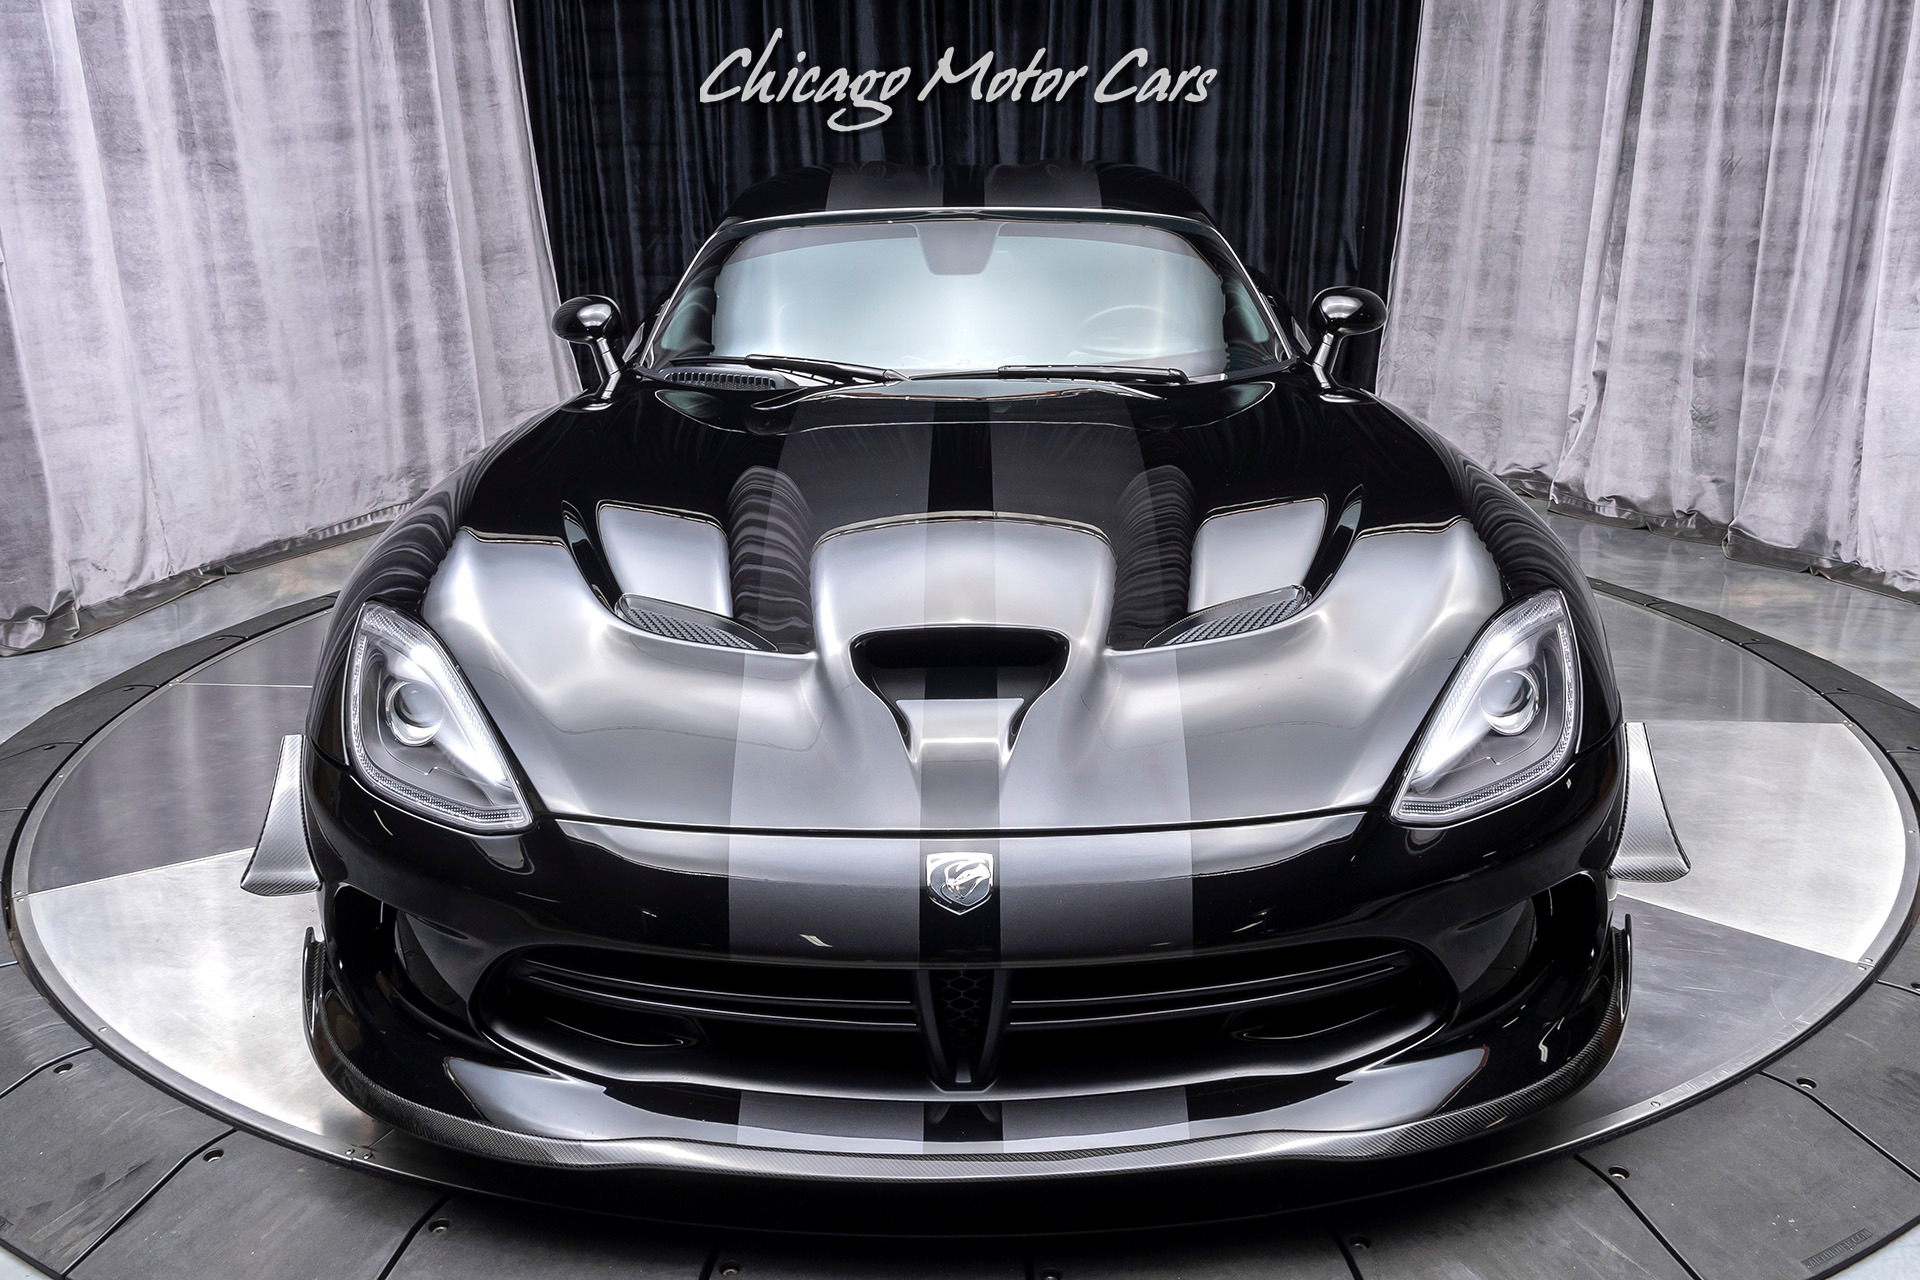 Used 14 Dodge Srt Viper Gts Coupe Msrp 140k Gts Laguna Interior Pkg For Sale Special Pricing Chicago Motor Cars Stock a